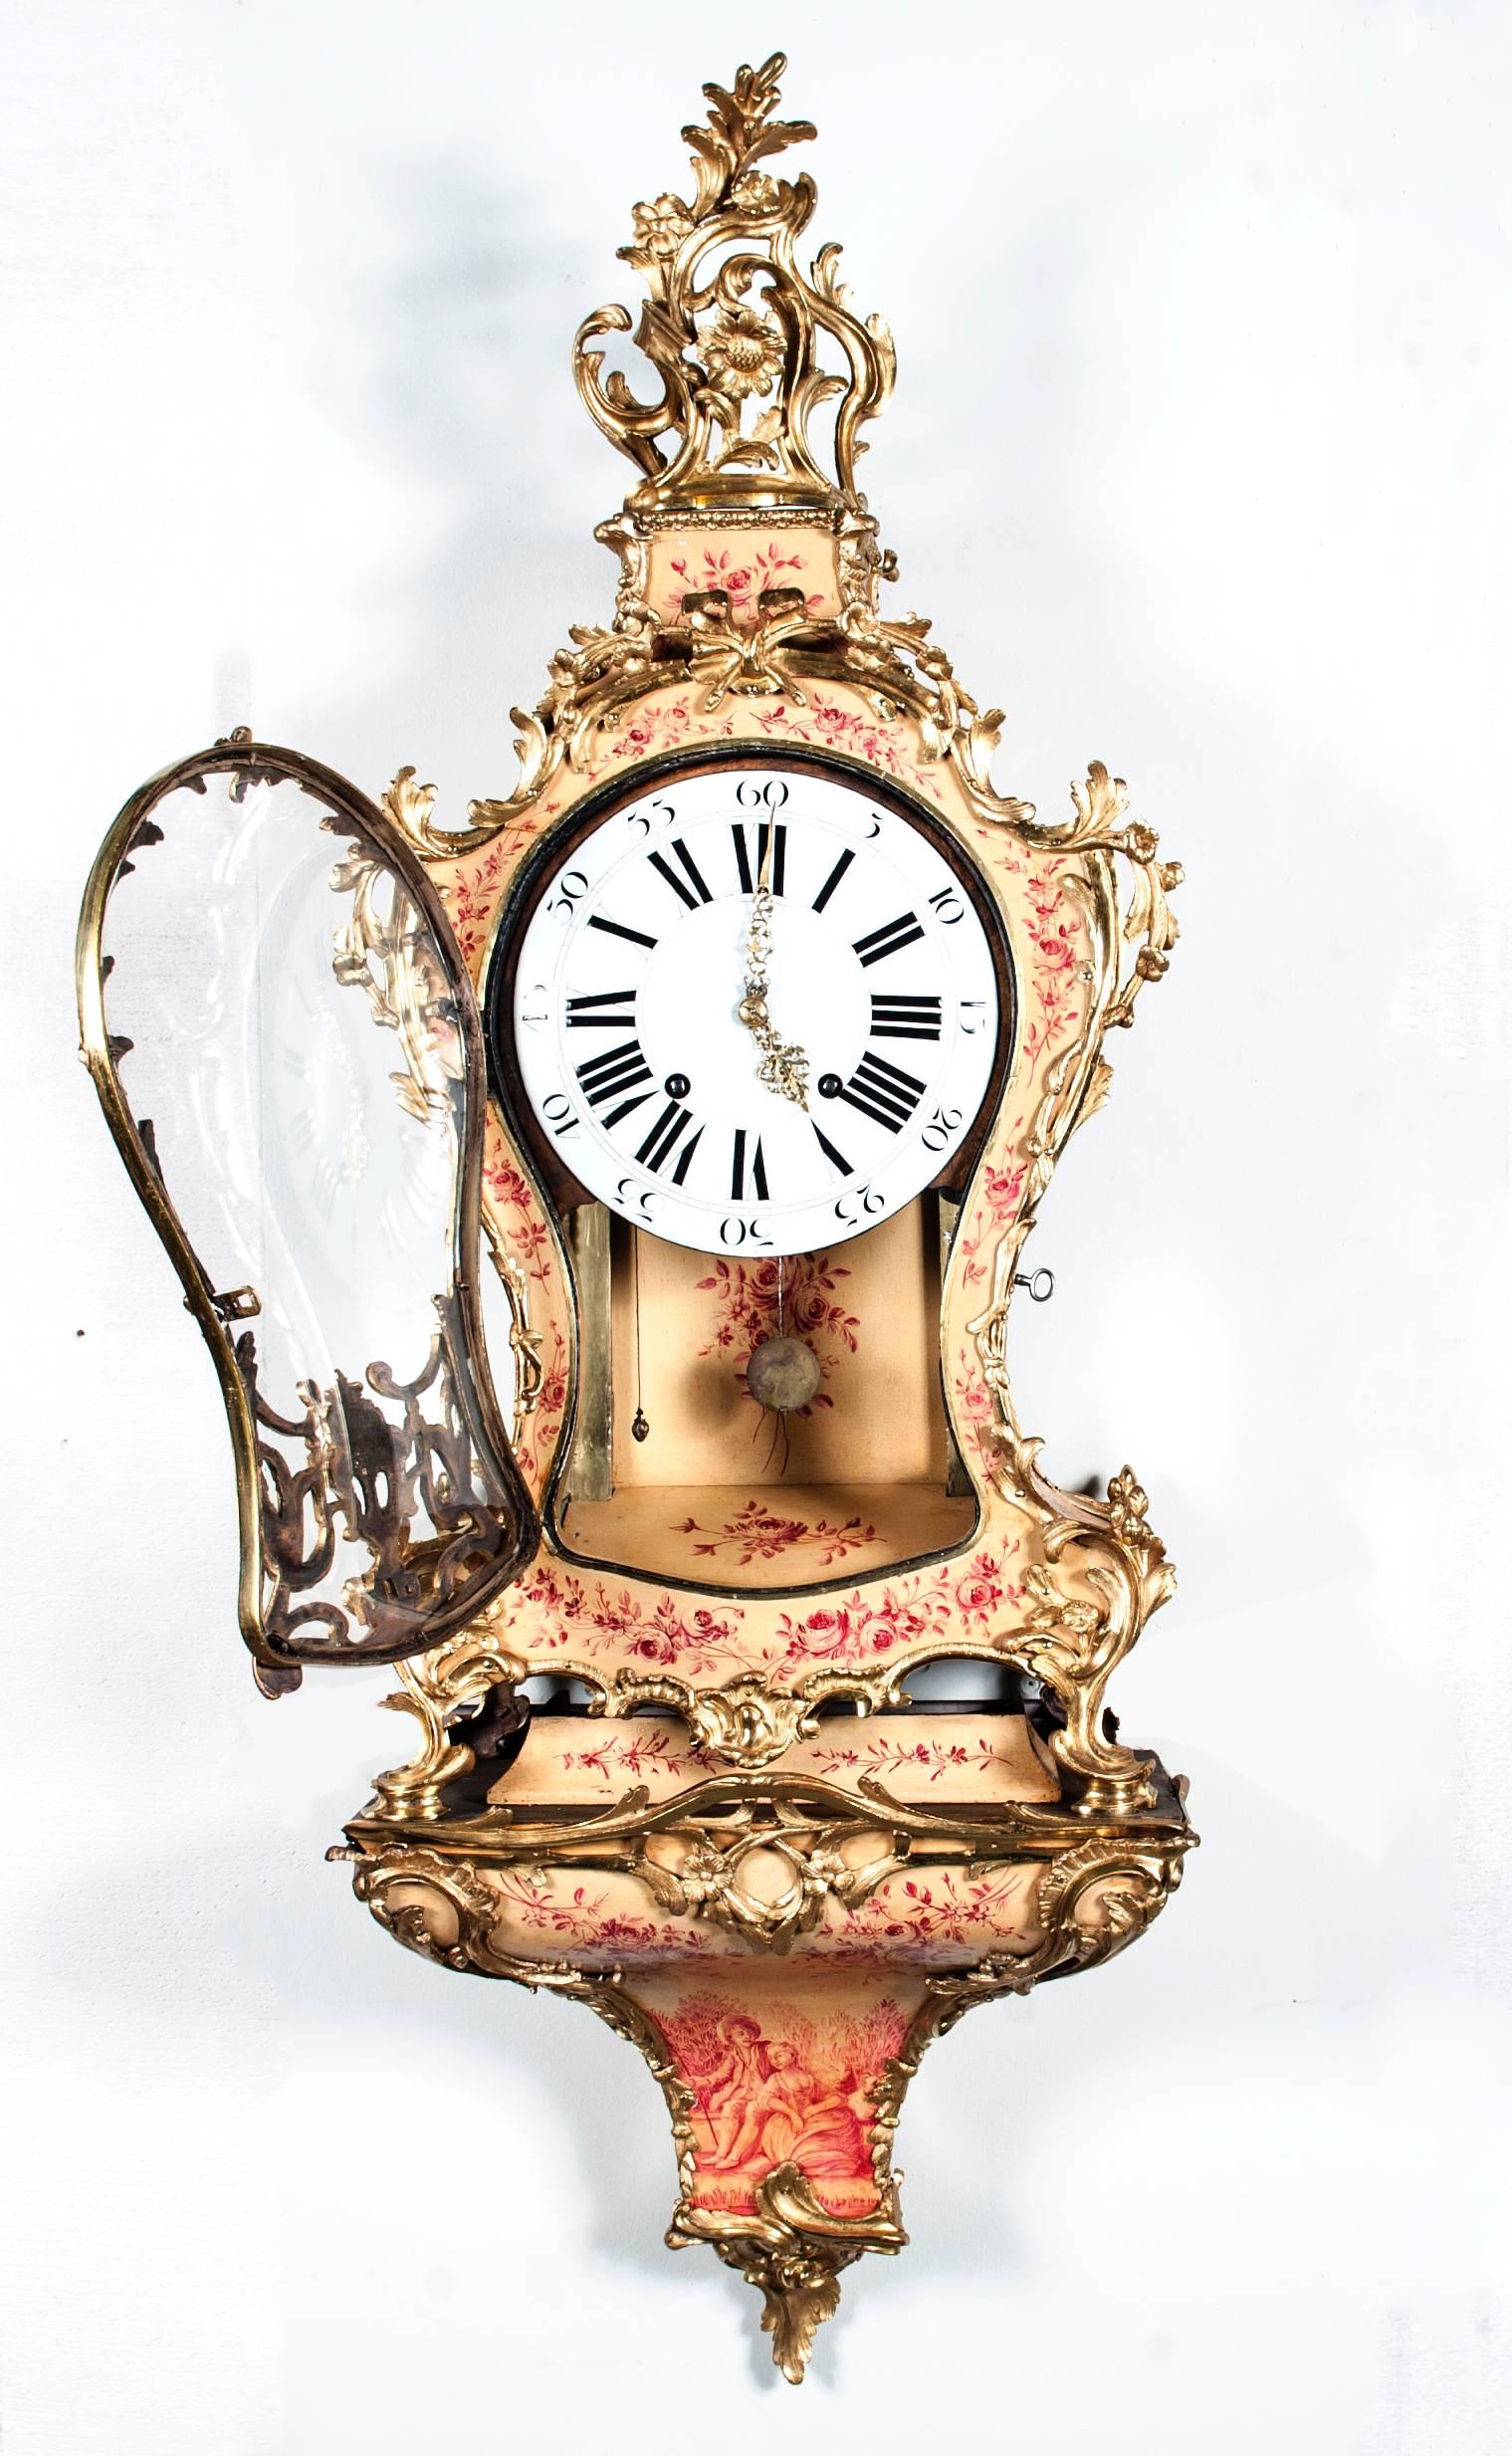 This nicely decorated Swiss console clock with very nice ormolu bronze mounts is from the Neuchâtel area and was very popular in those days. 
The charming waisted proportions are very beautiful the movement with quarter striking and verge